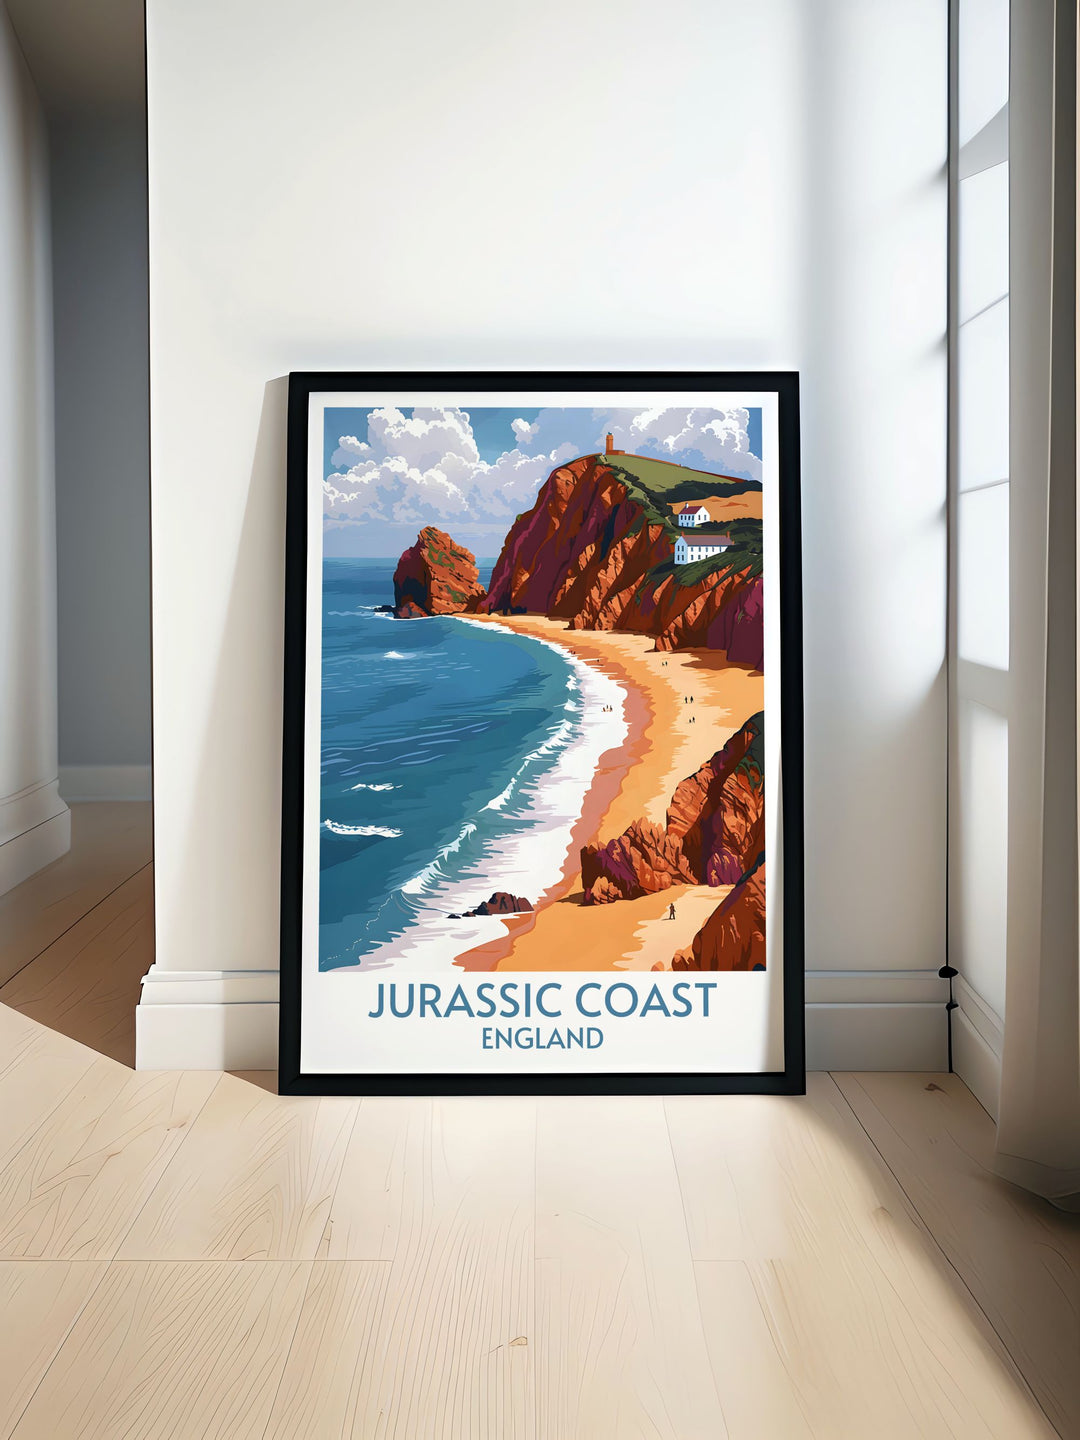 Scenic Jurassic Coast England print capturing the dramatic cliffs and unique rock formations of this UNESCO World Heritage site, perfect for nature lovers and history enthusiasts.